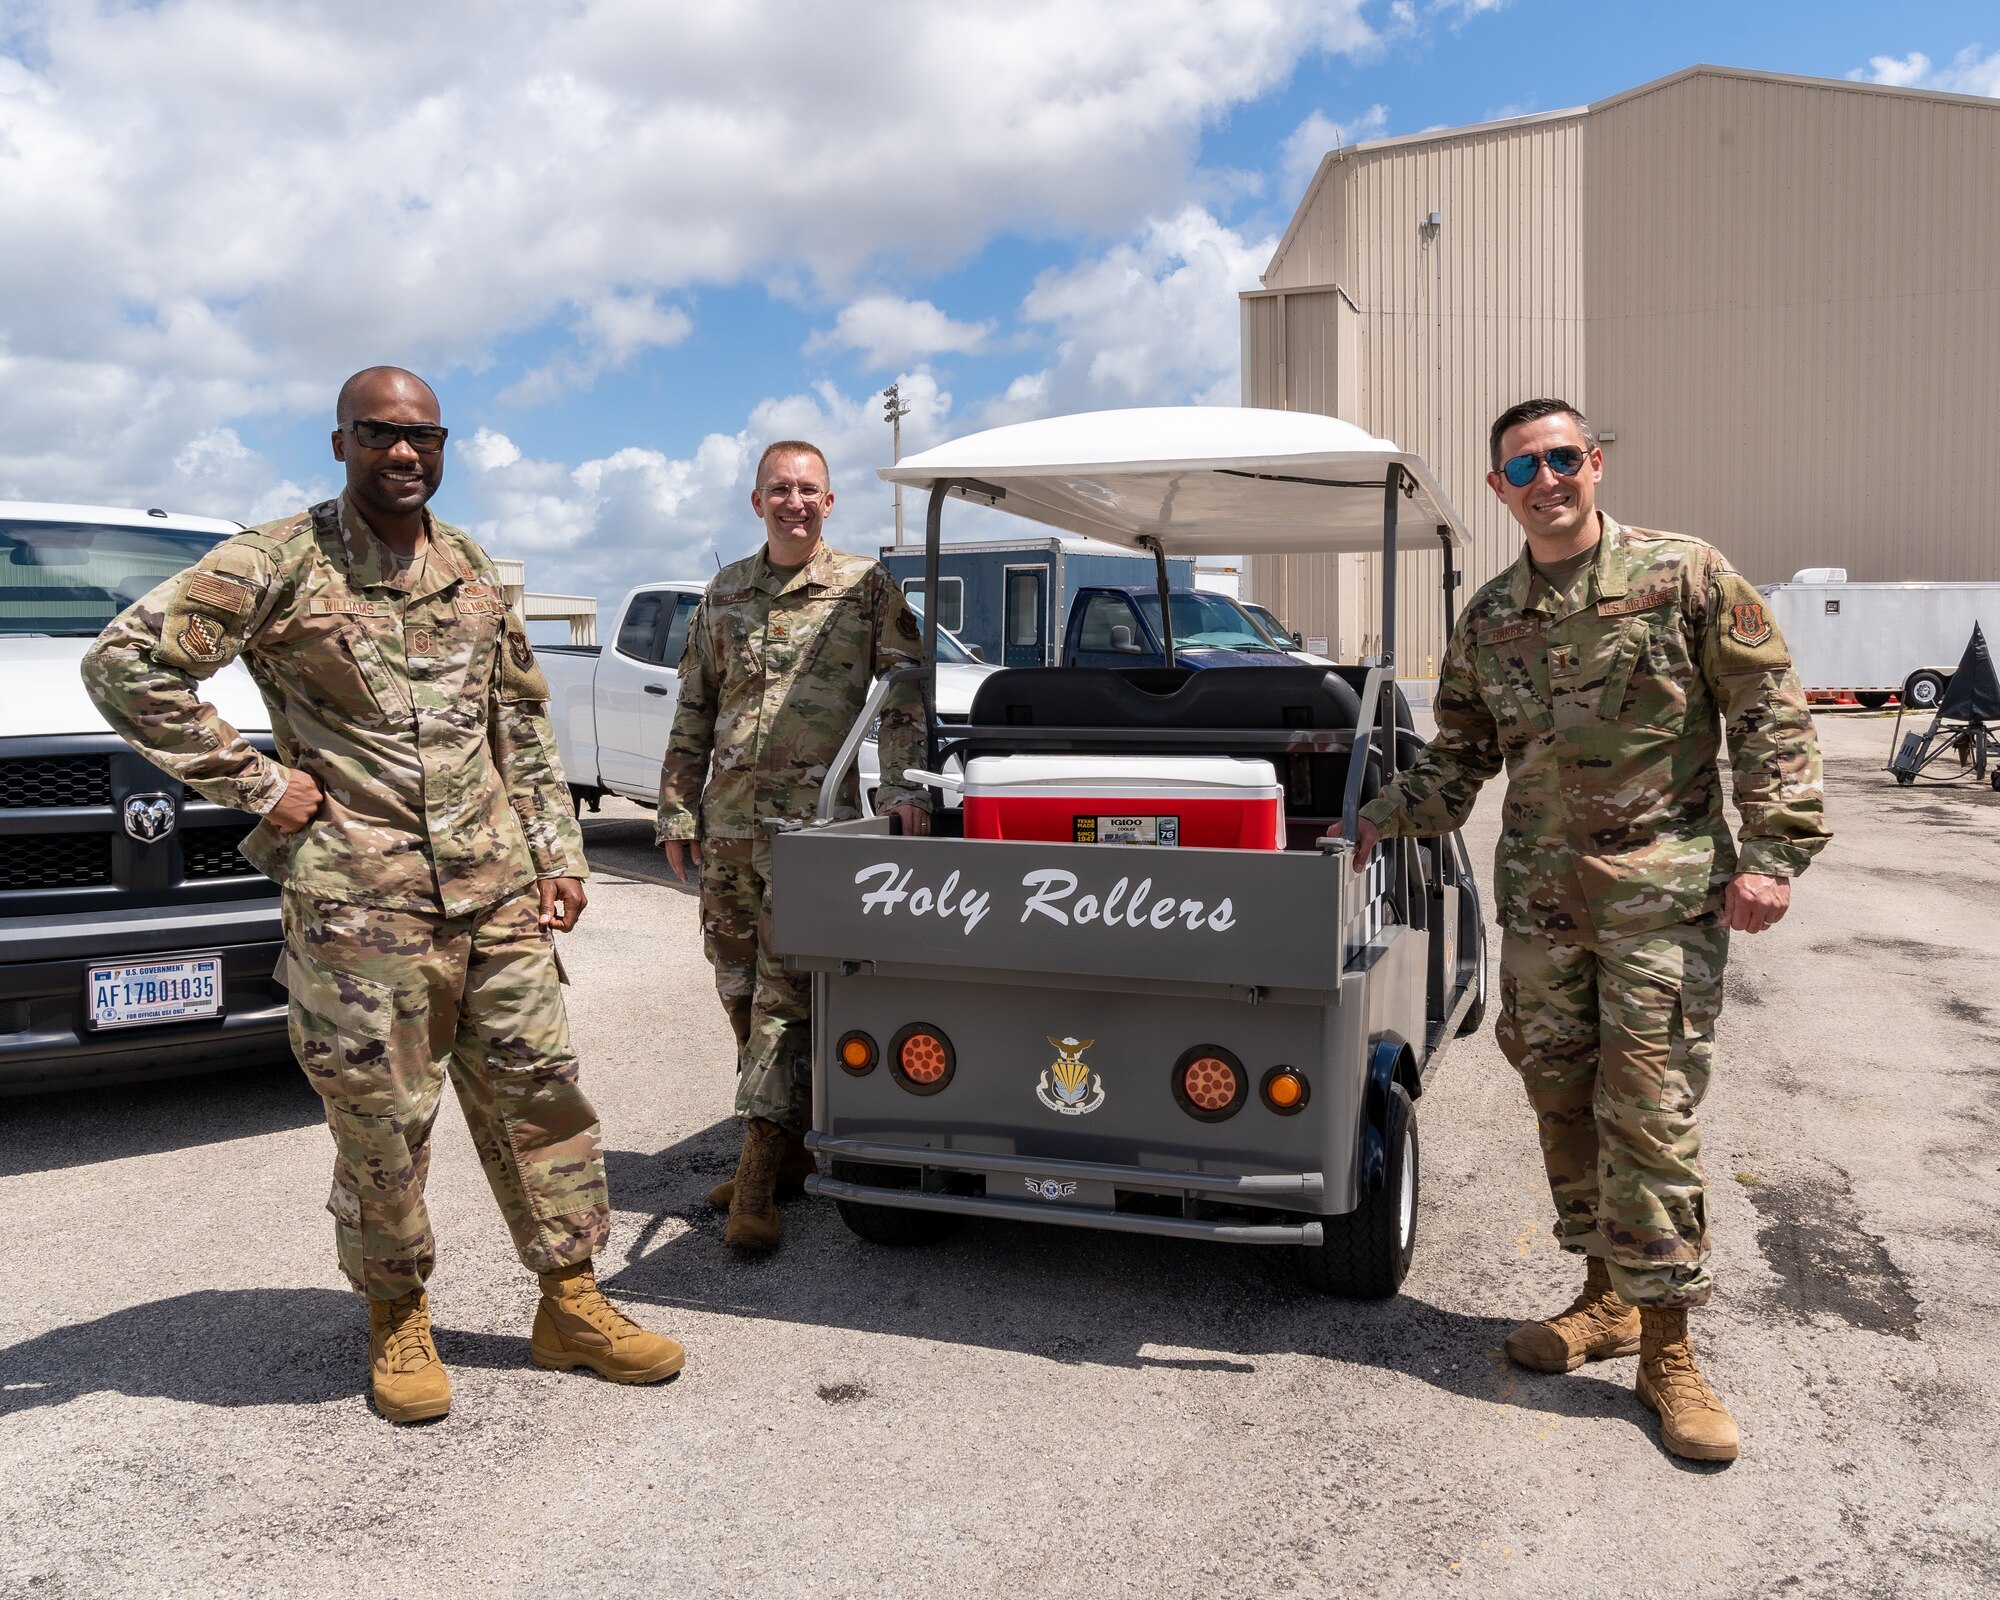 From left, Senior Master Sgt. Paul Williams, Chaplain (Maj.) John Rollyson and 2nd Lt. Brian A. Harris, Homestead Chaplain Corps, stand next to the Chaplain's cart dubbed "Holly Rollers" at Homestead Air Reserve Base, Fla., June 9, 2021. Harris finished his first evaluation tour with the Homestead Chaplain Corps, bringing him one step closer to becoming a military chaplain. (U.S. Air Force photo by Tech. Sgt. Lionel Castellano)